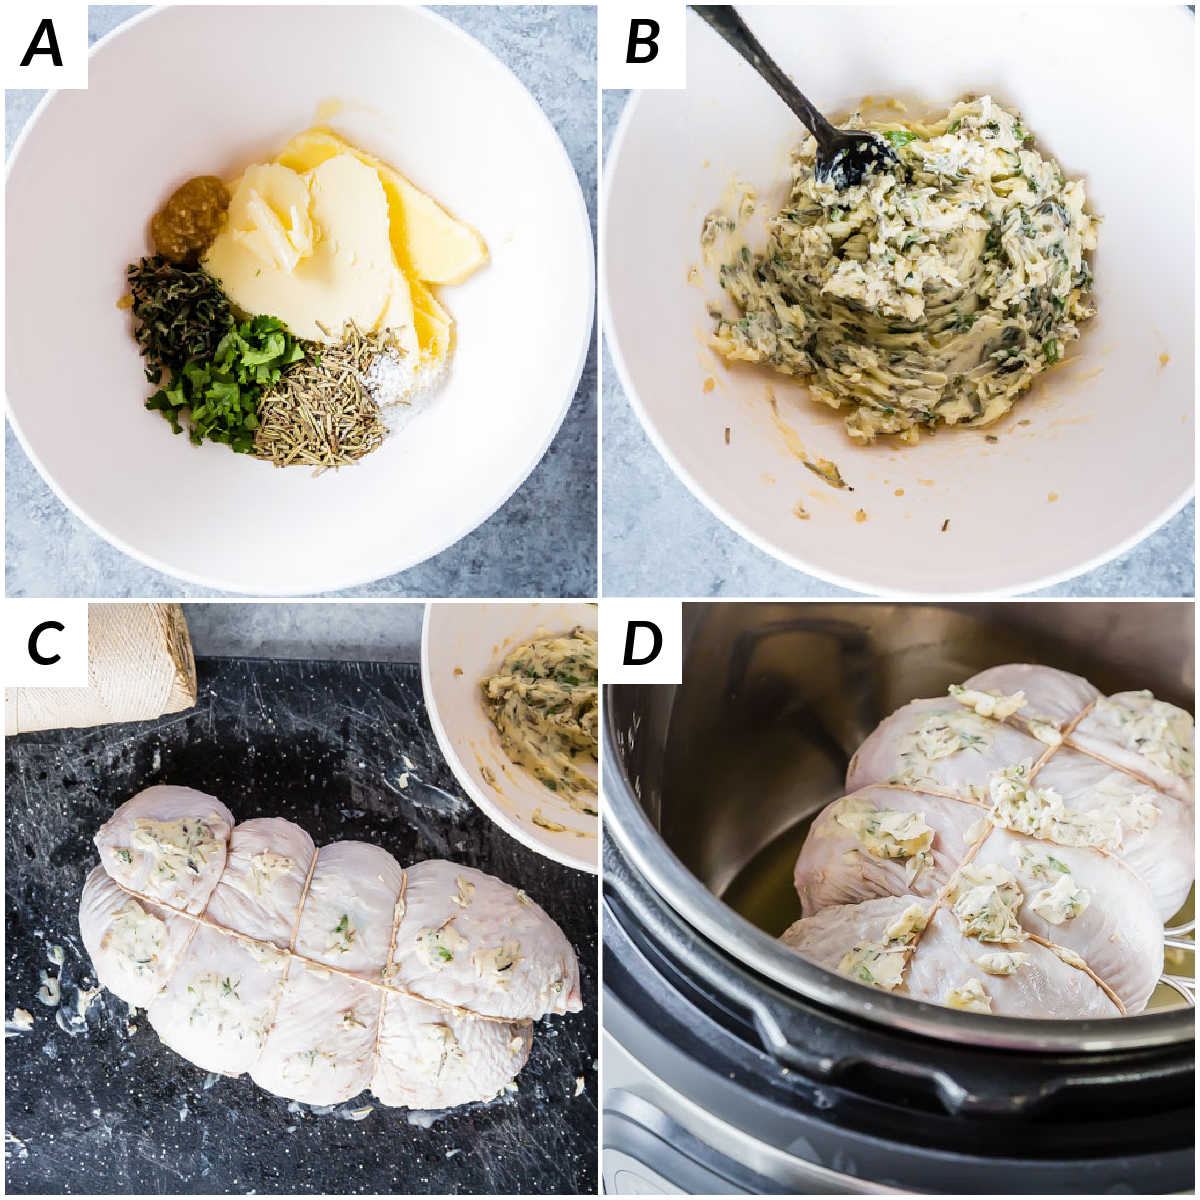 image collage showing some of the steps for making Instant Pot turkey breast